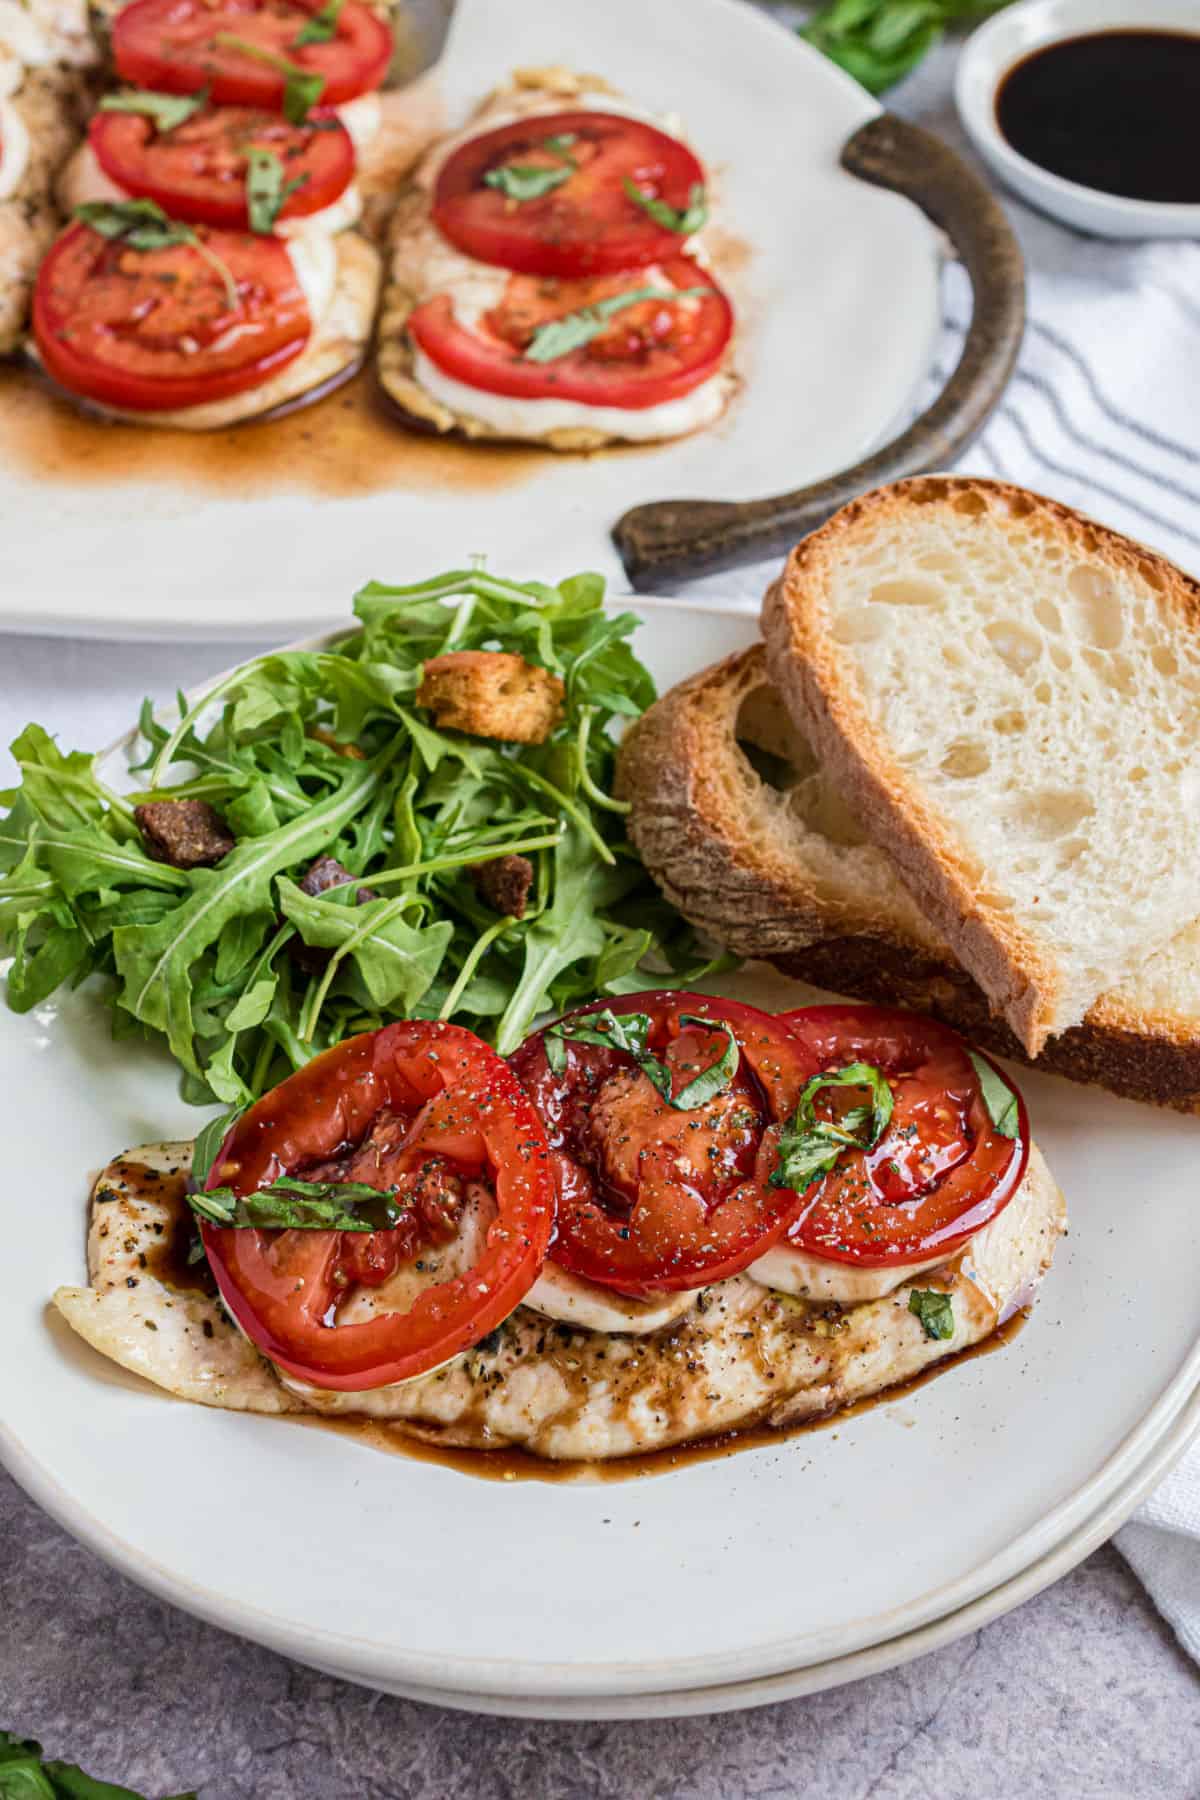 Chicken caprese served with a side salad and fresh bread slices.